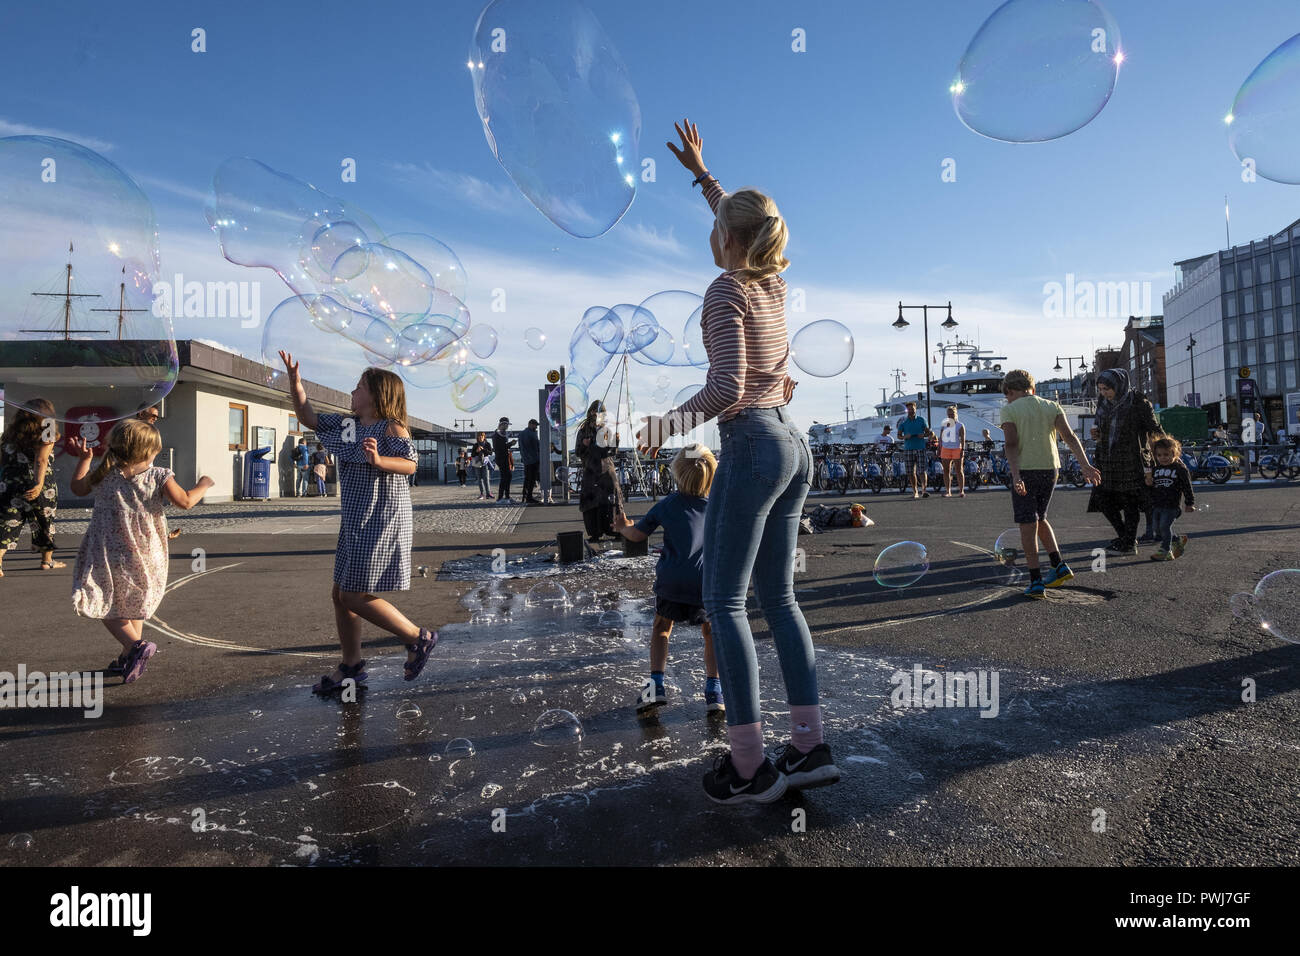 Children are playing with soap bubbles at Aker brygge in Oslo, Norway Stock Photo